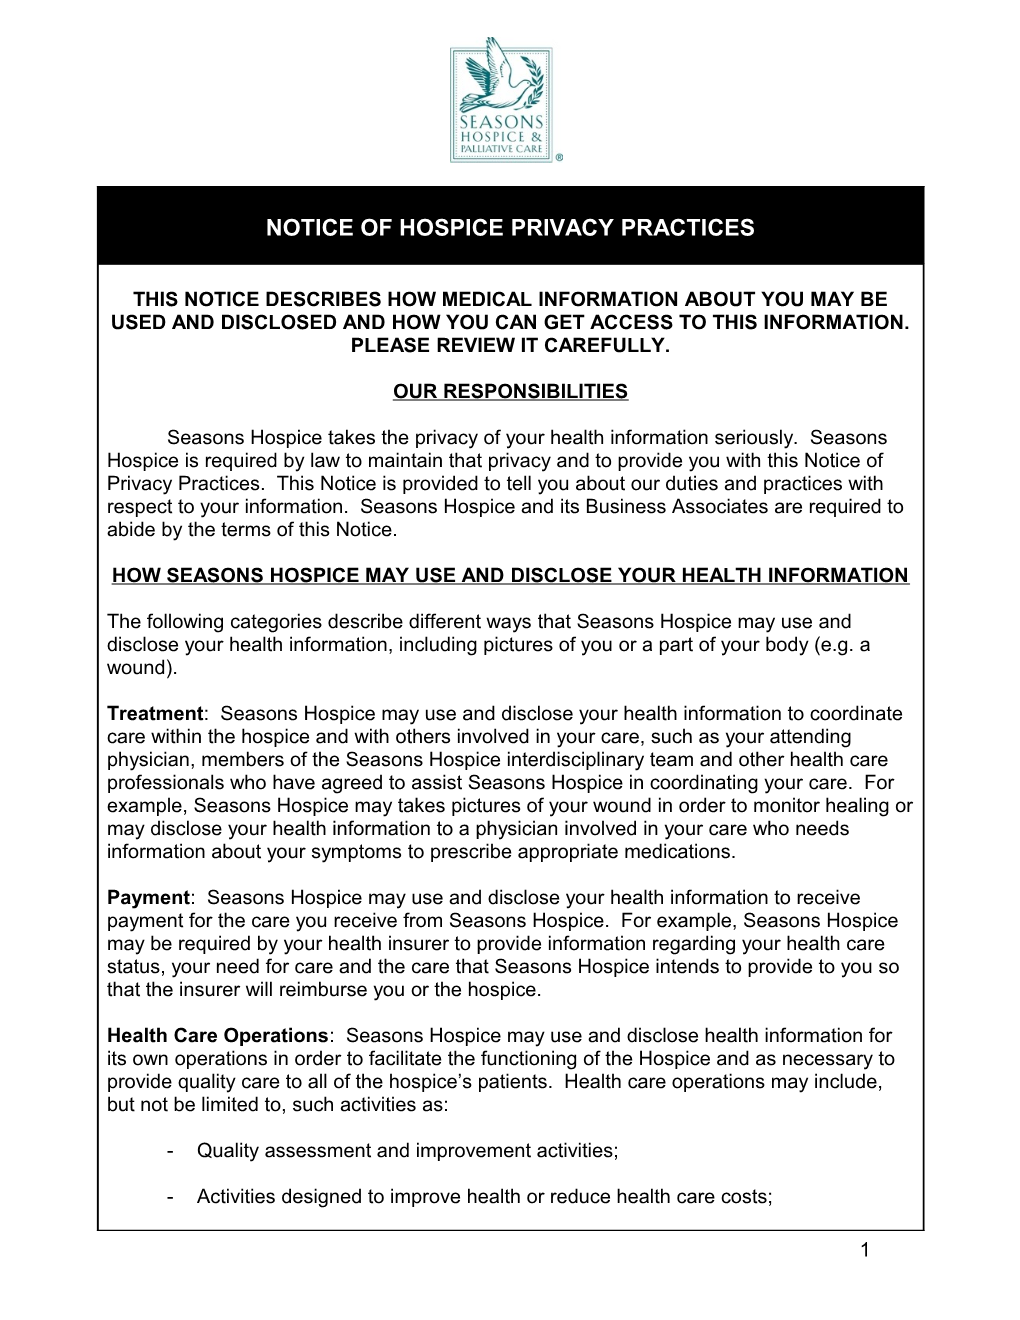 Sample Notice of Hospice Privacy Practices